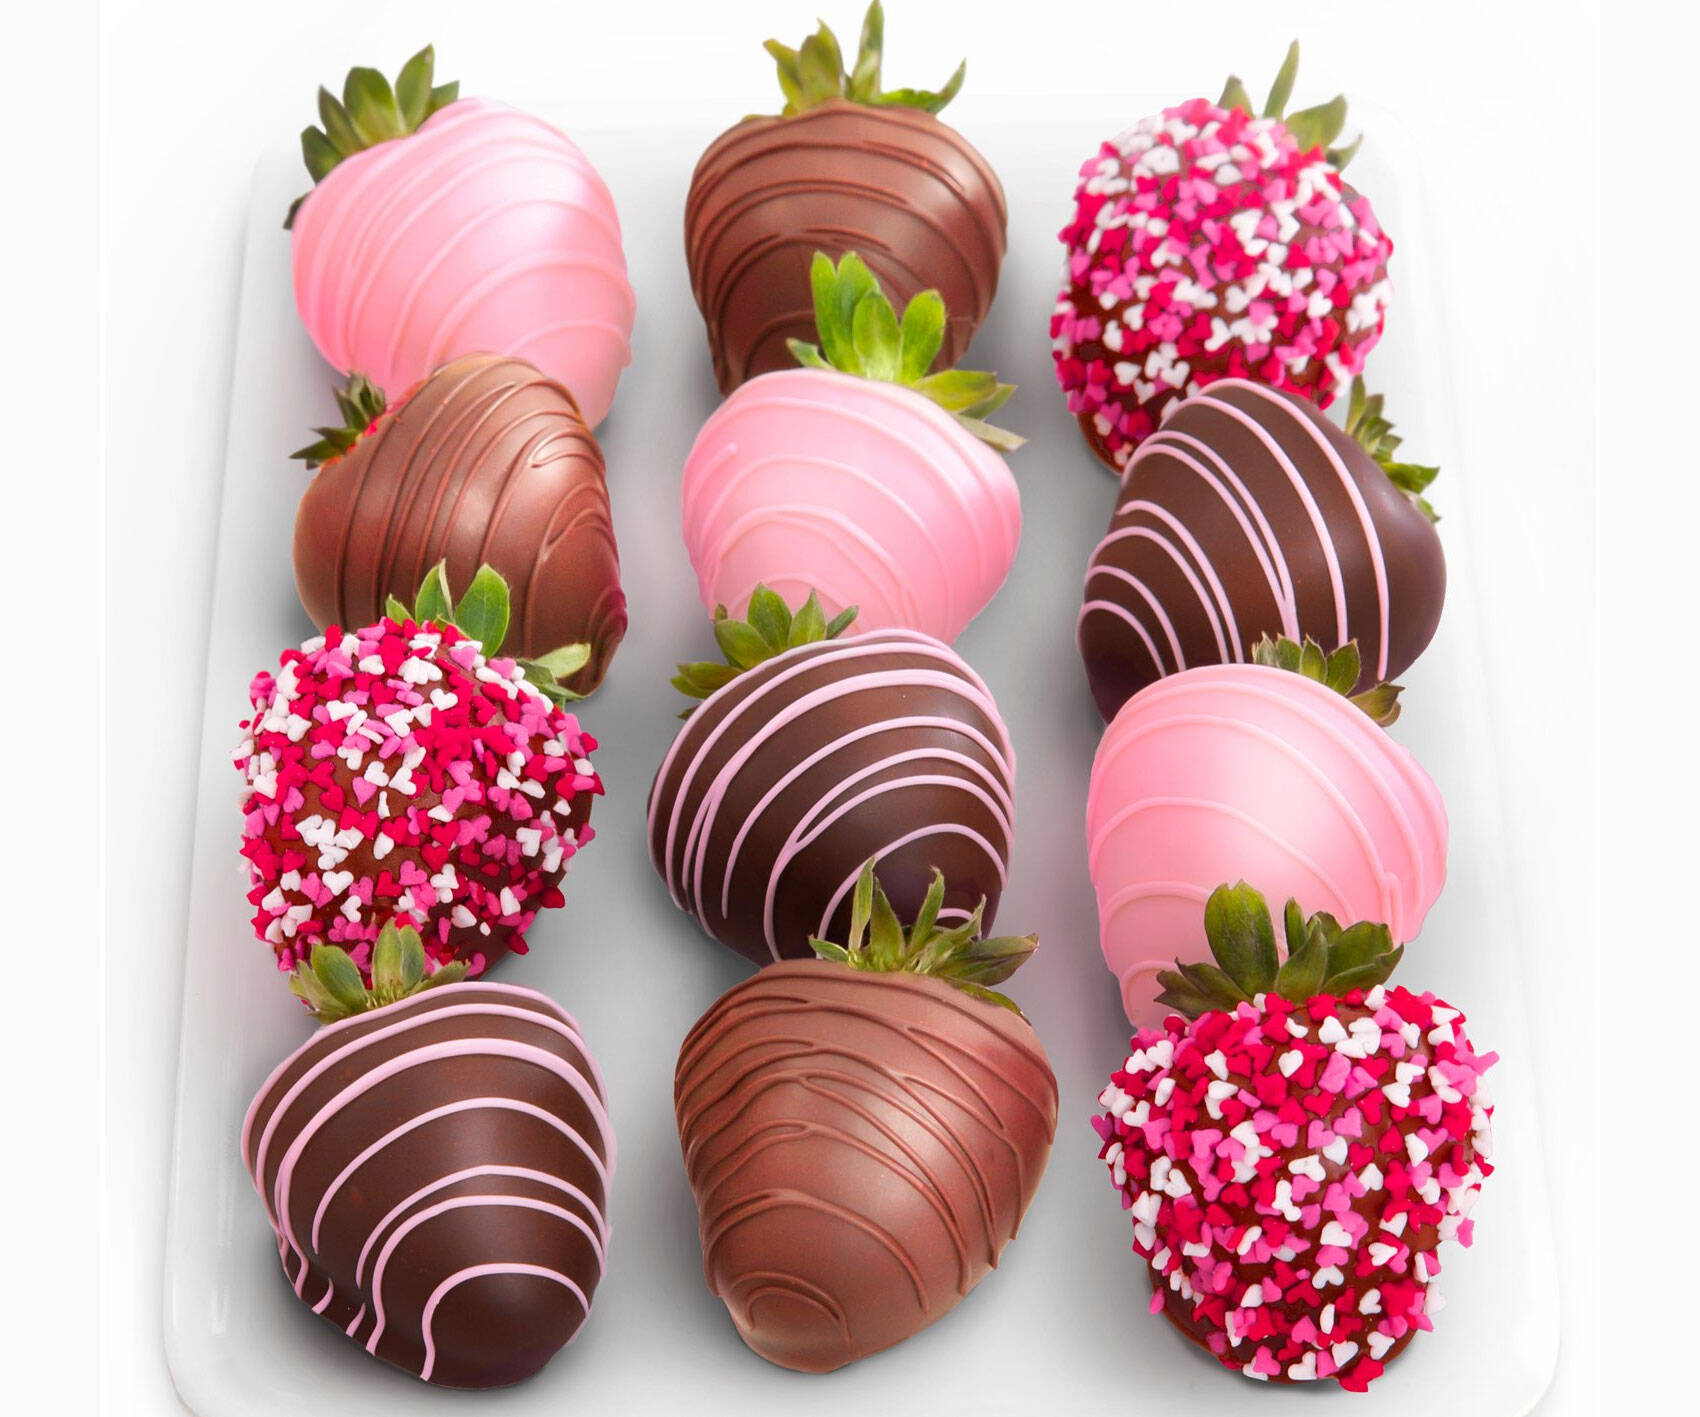 Chocolate Covered Strawberries - coolthings.us